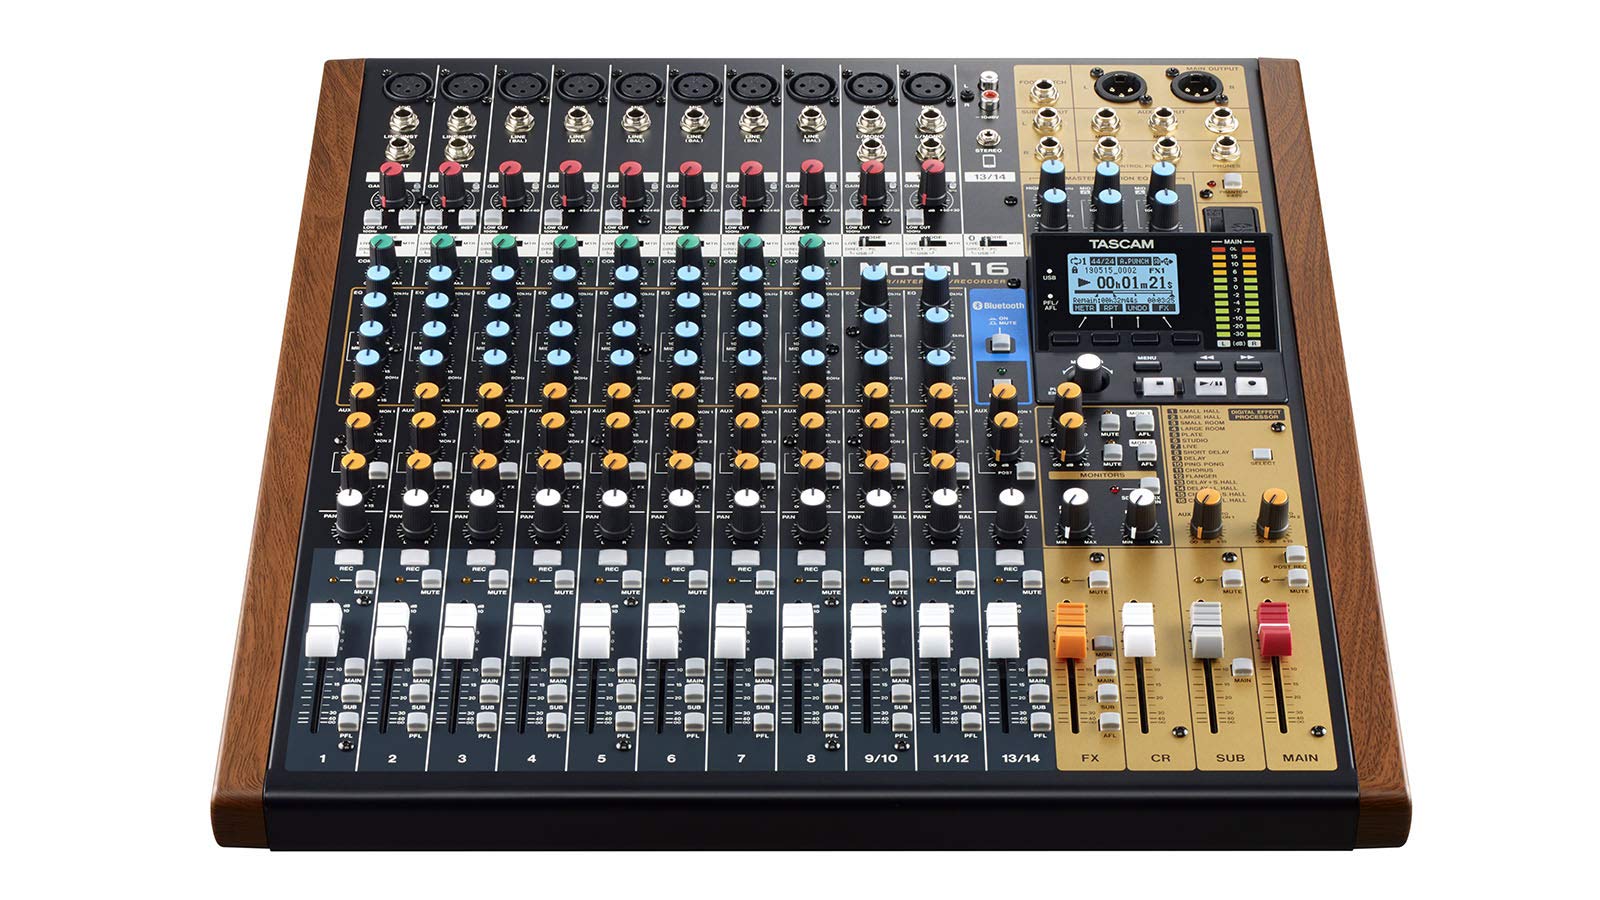 Tascam - Model 16 All-In-One 16-track Mixing and Recording Studio, Analog Mixer, Digital Recorder, USB Audio Interface